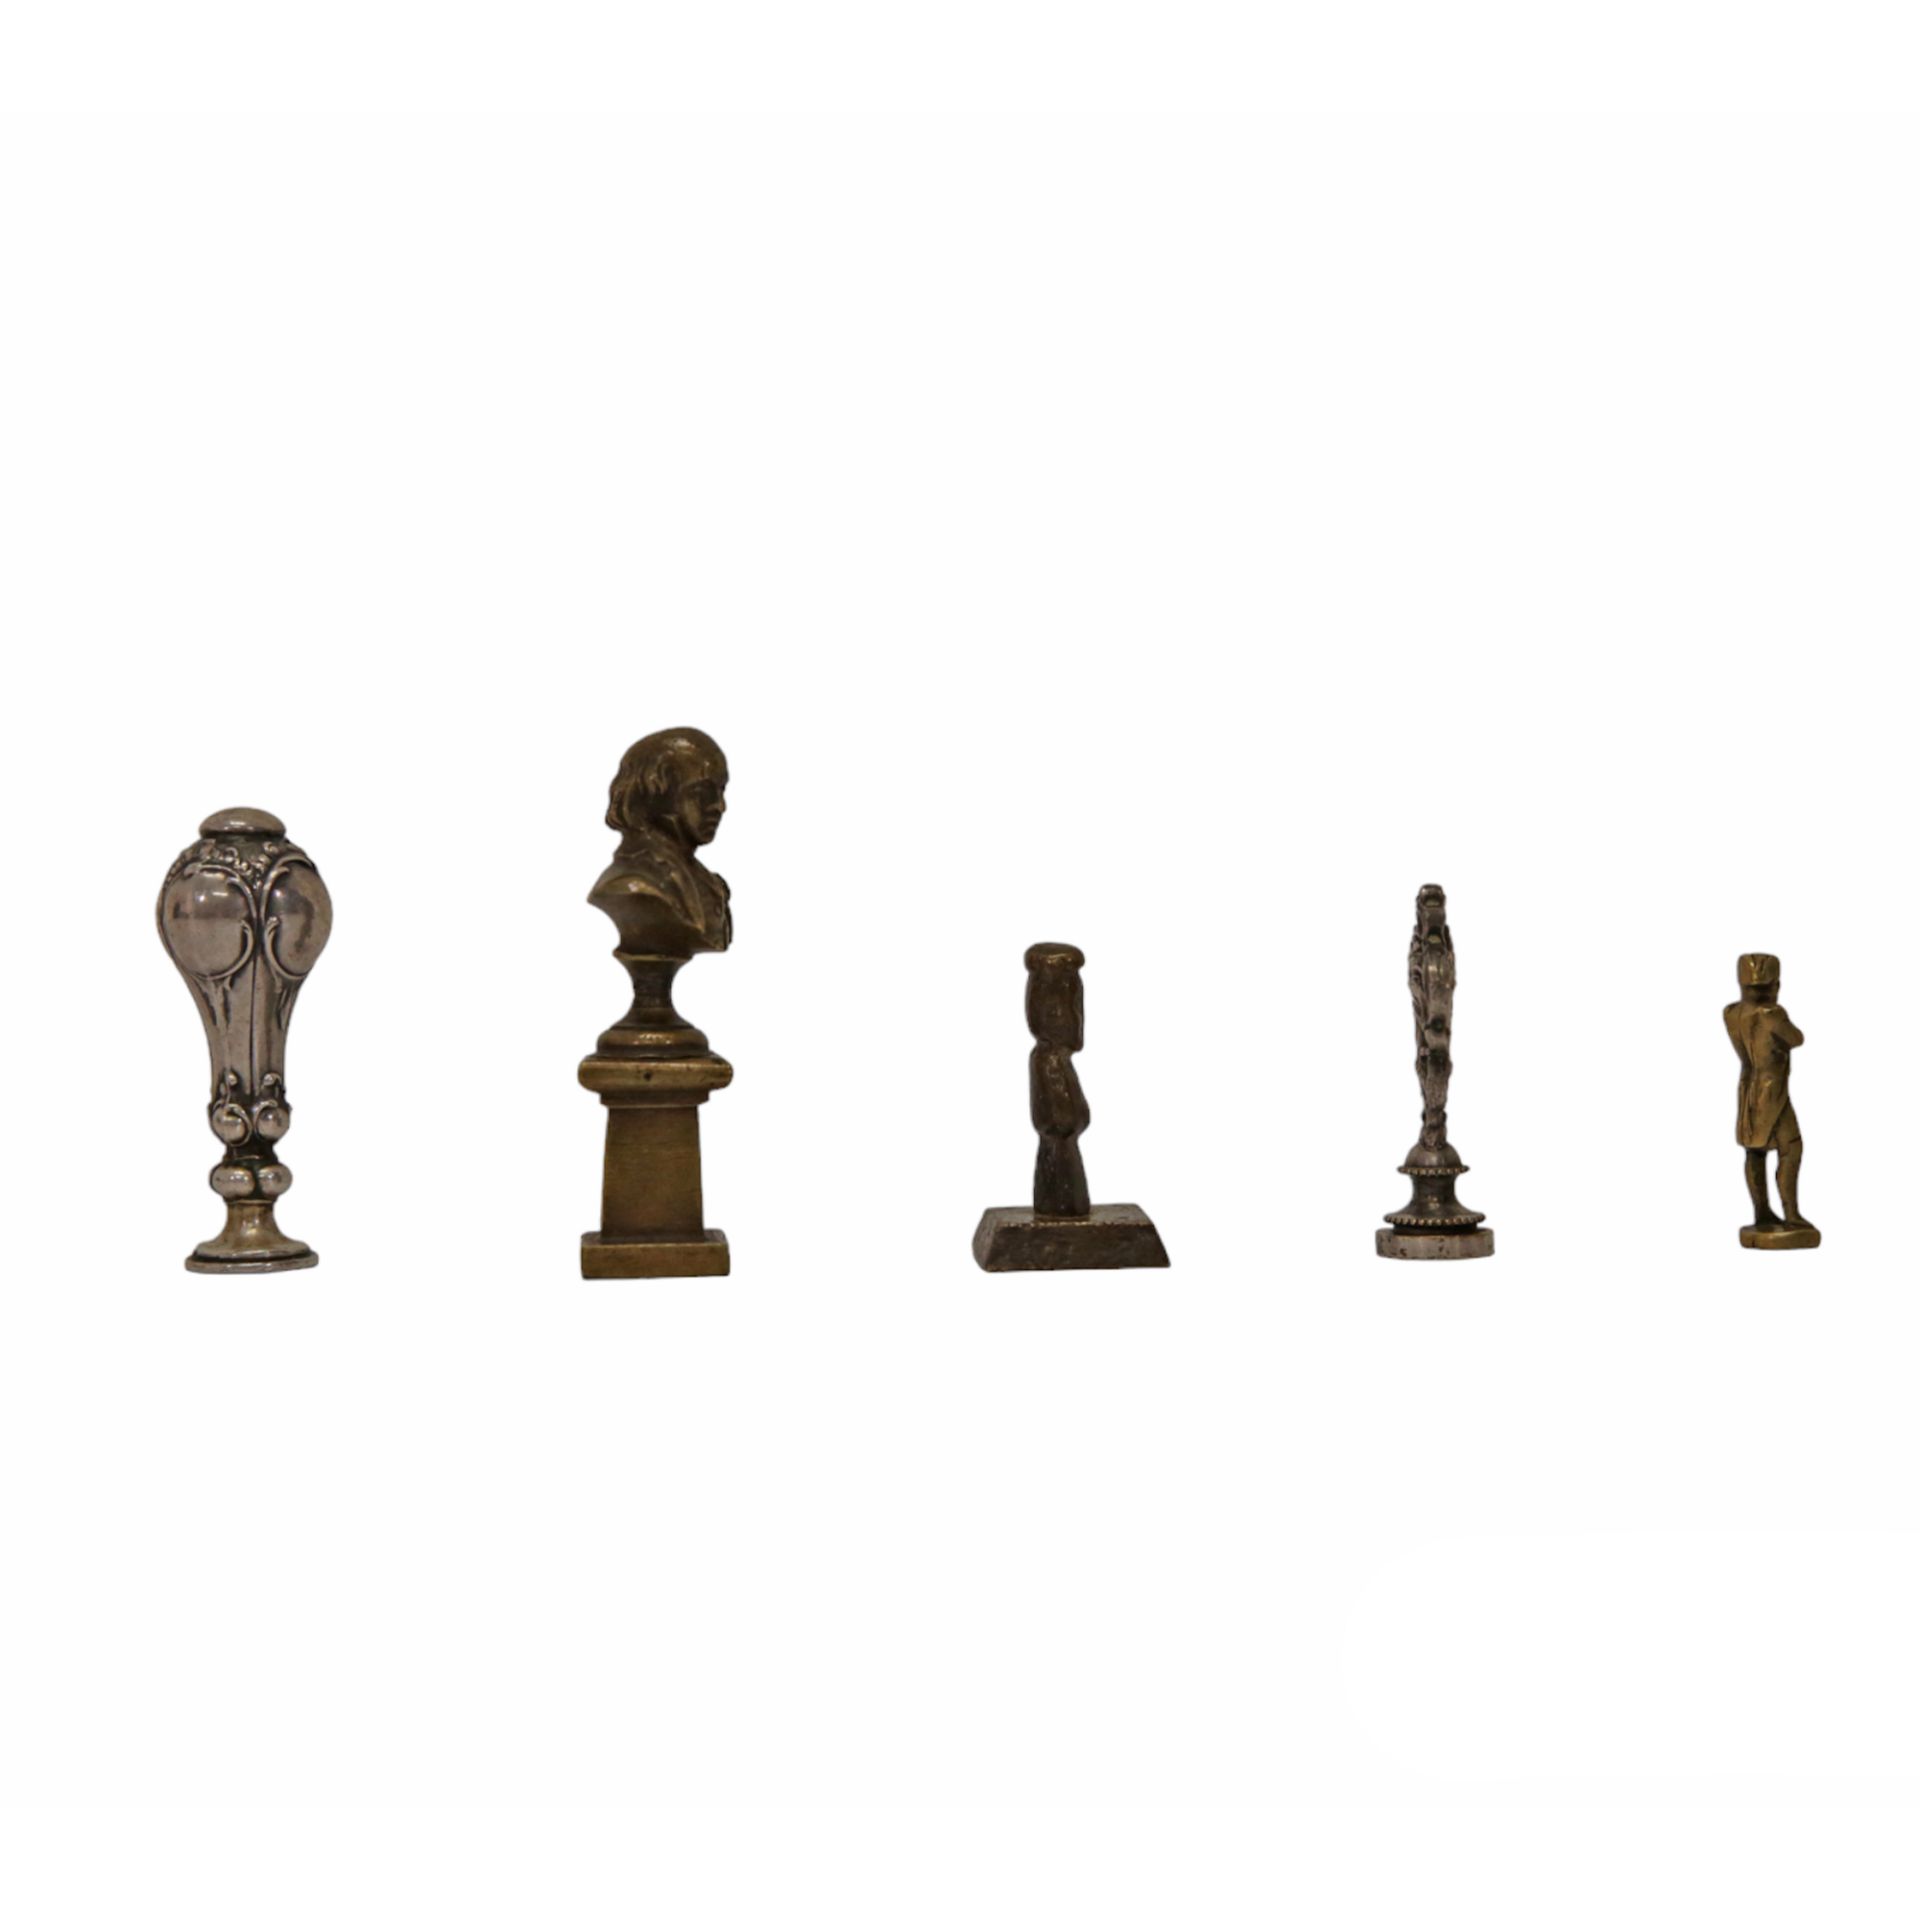 Lot of five bronze and silver-plated figurines of the 19th-20th century, Napoleon figure and others. - Image 4 of 5